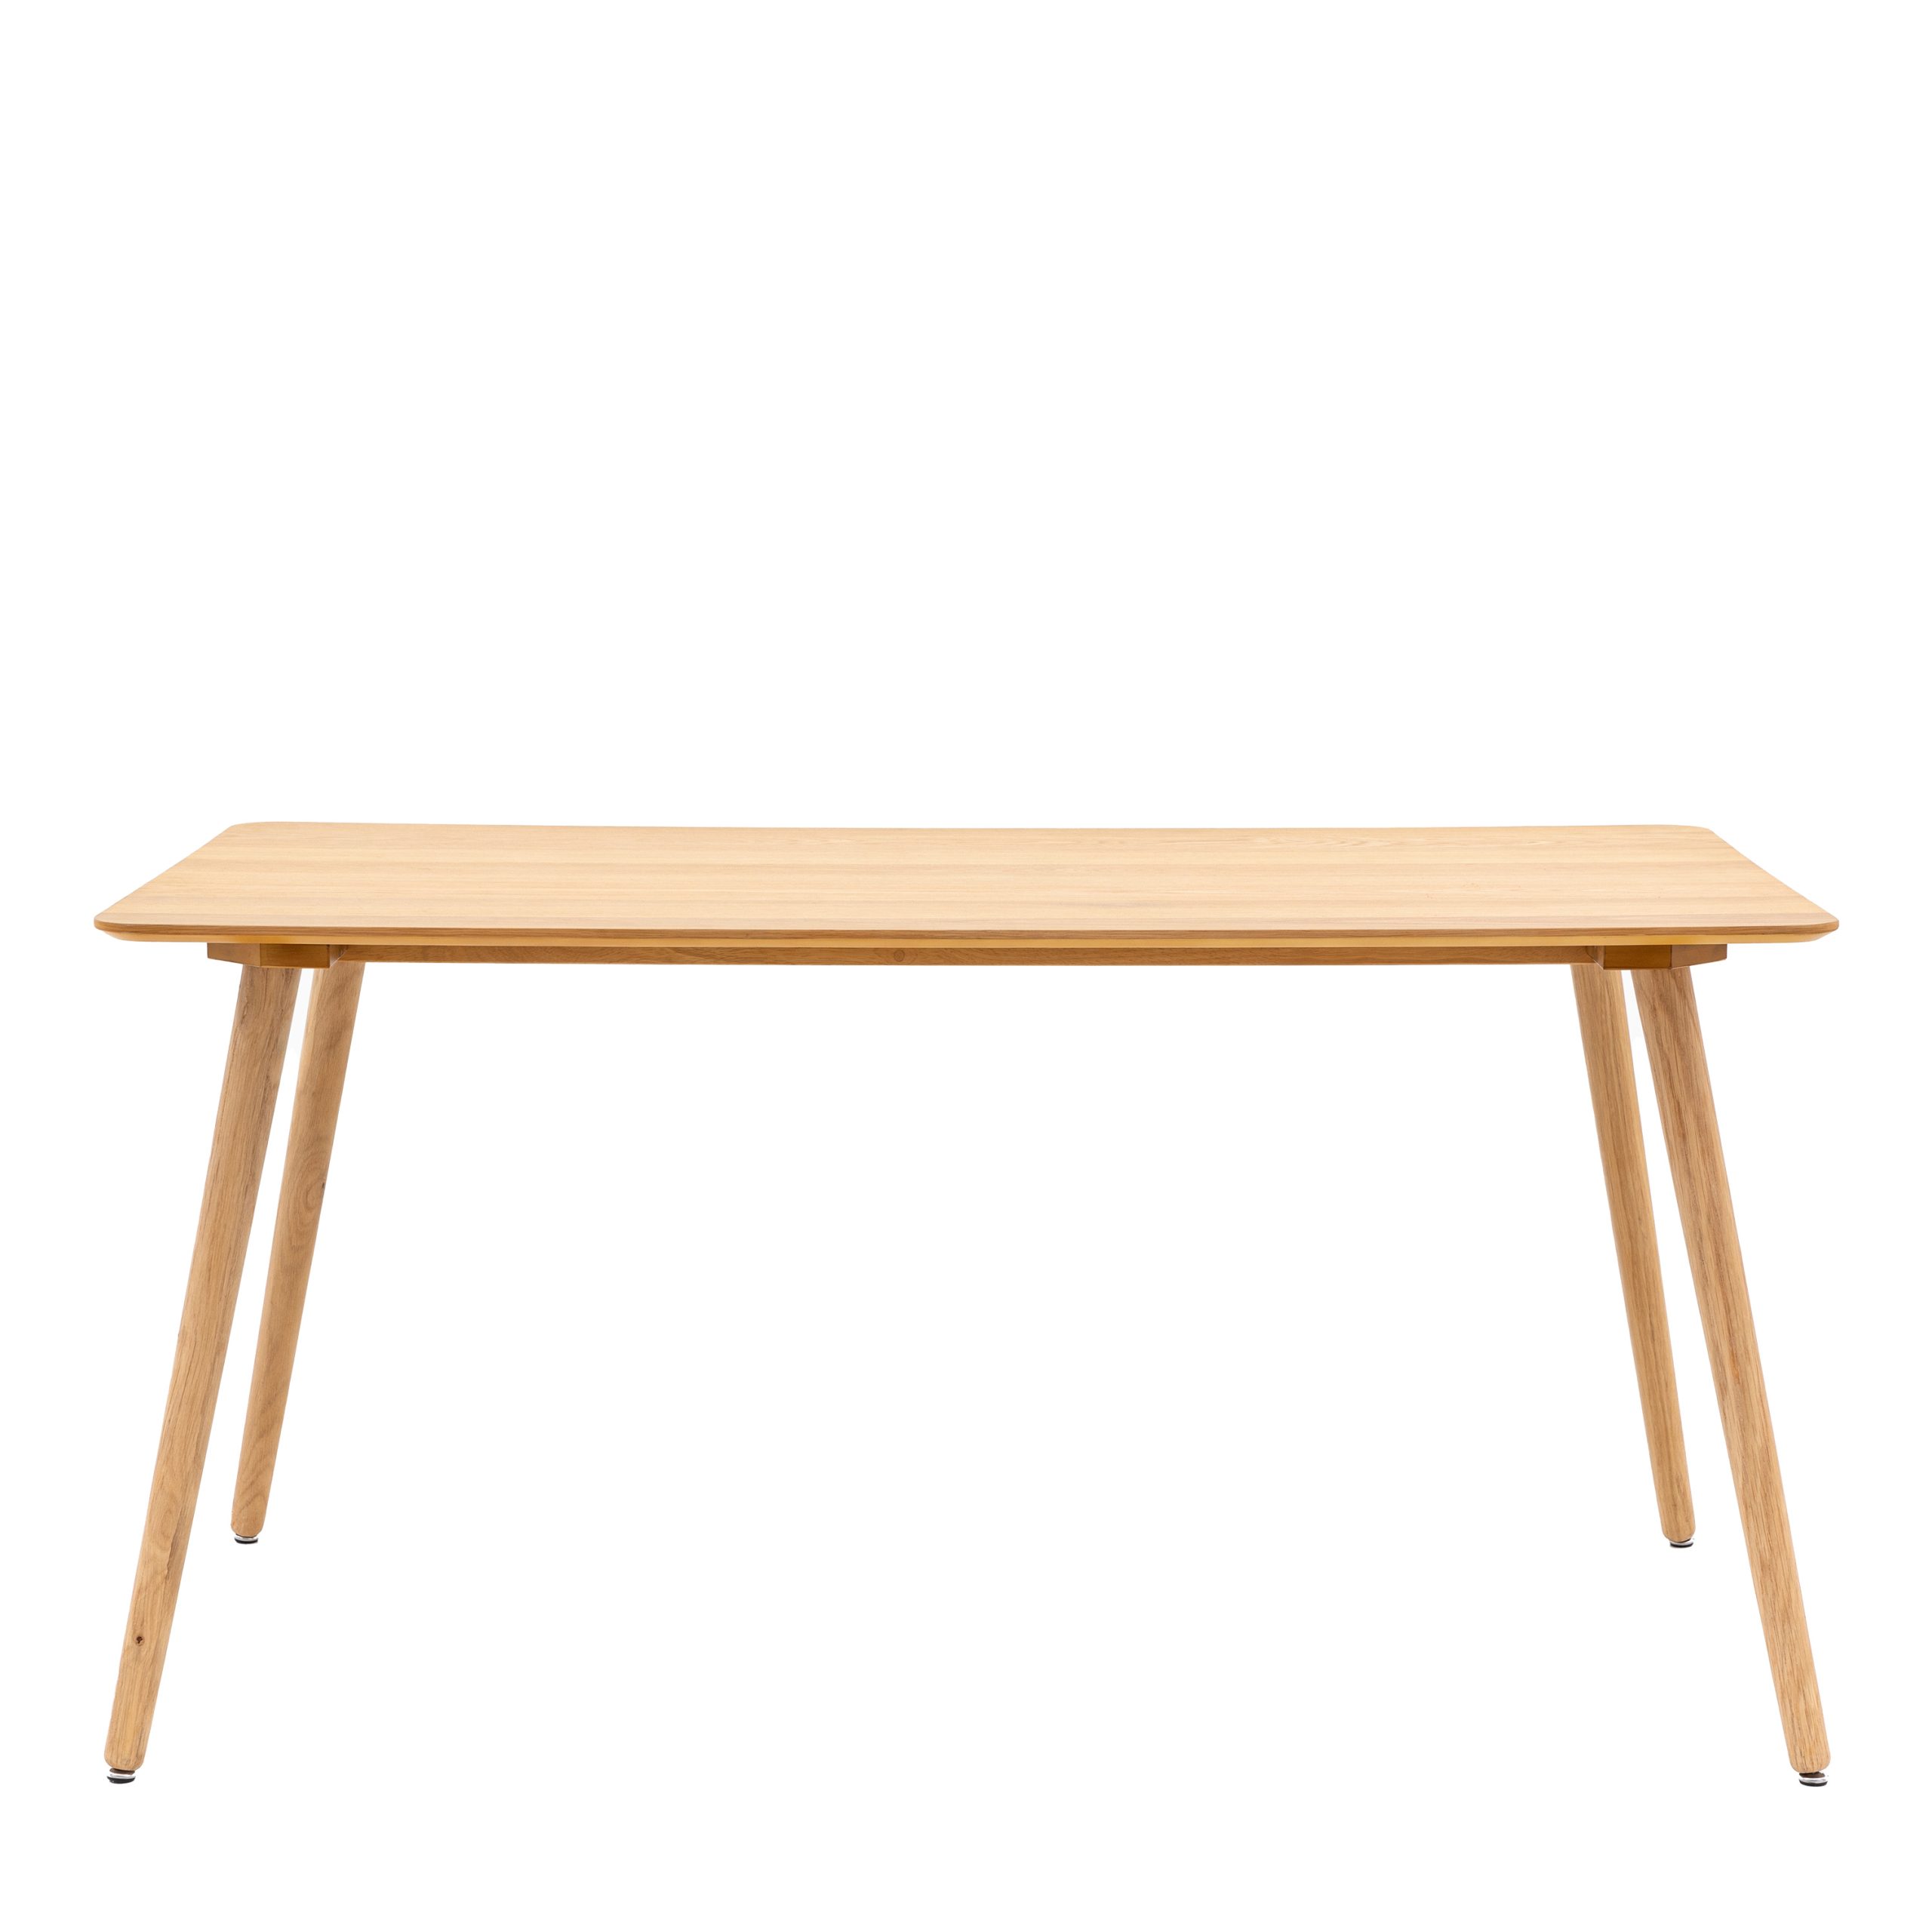 Gallery Direct Hatfield Dining Table Natural